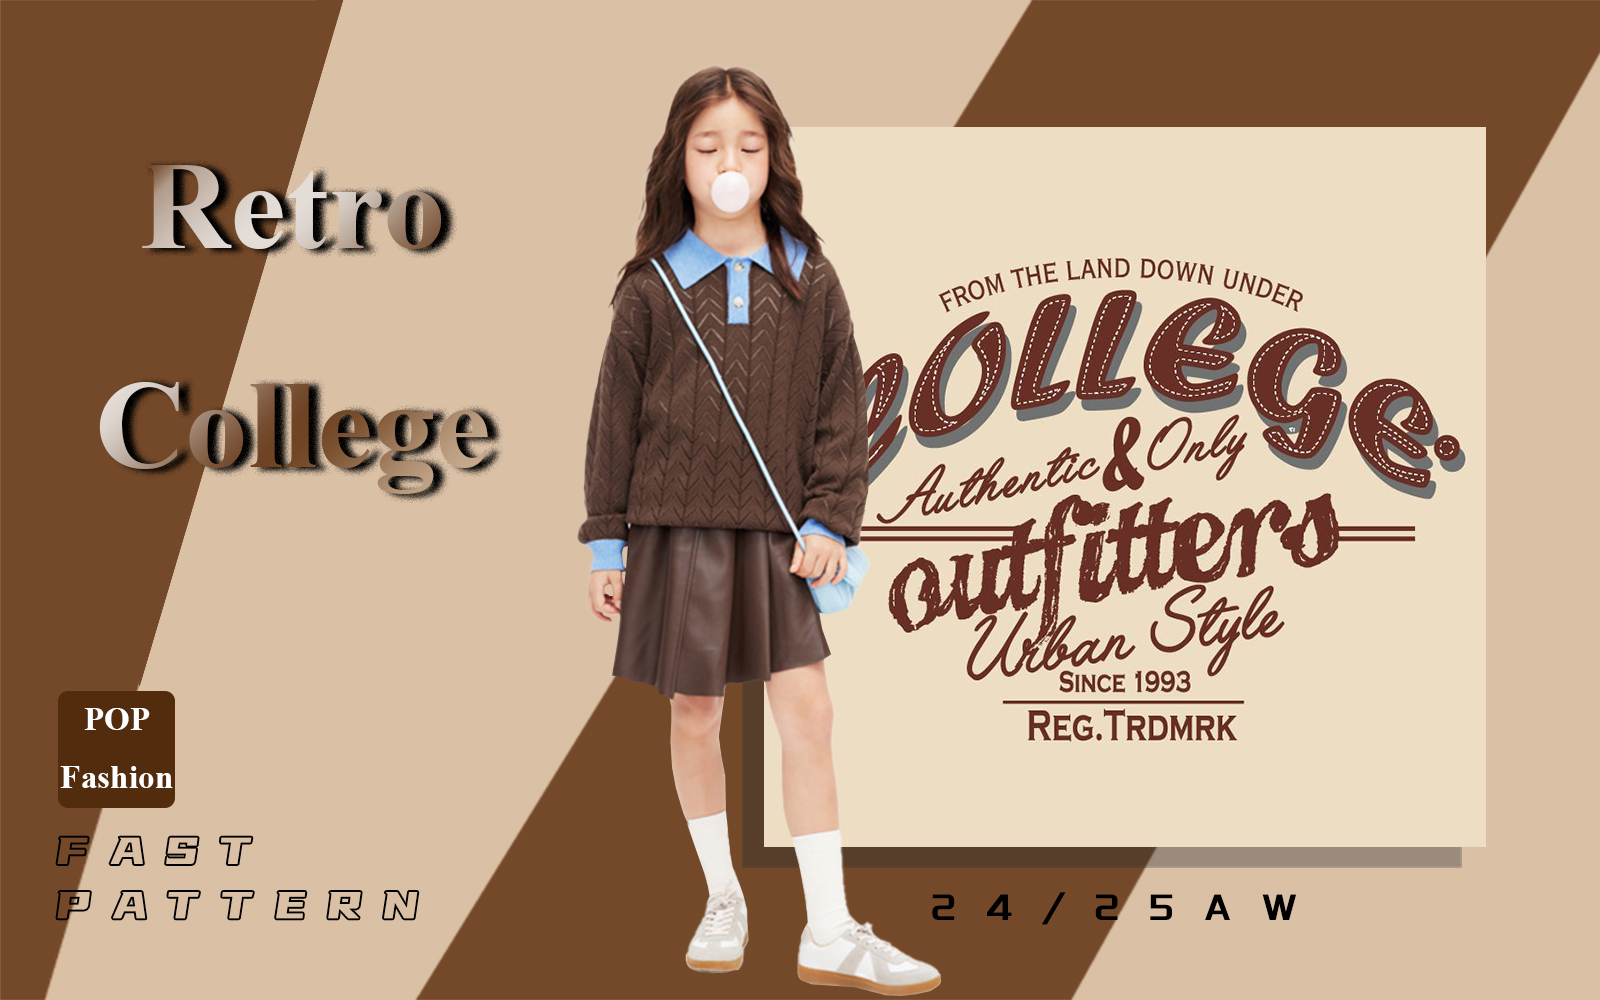 Retro College -- The Pattern Trend for Kidswear